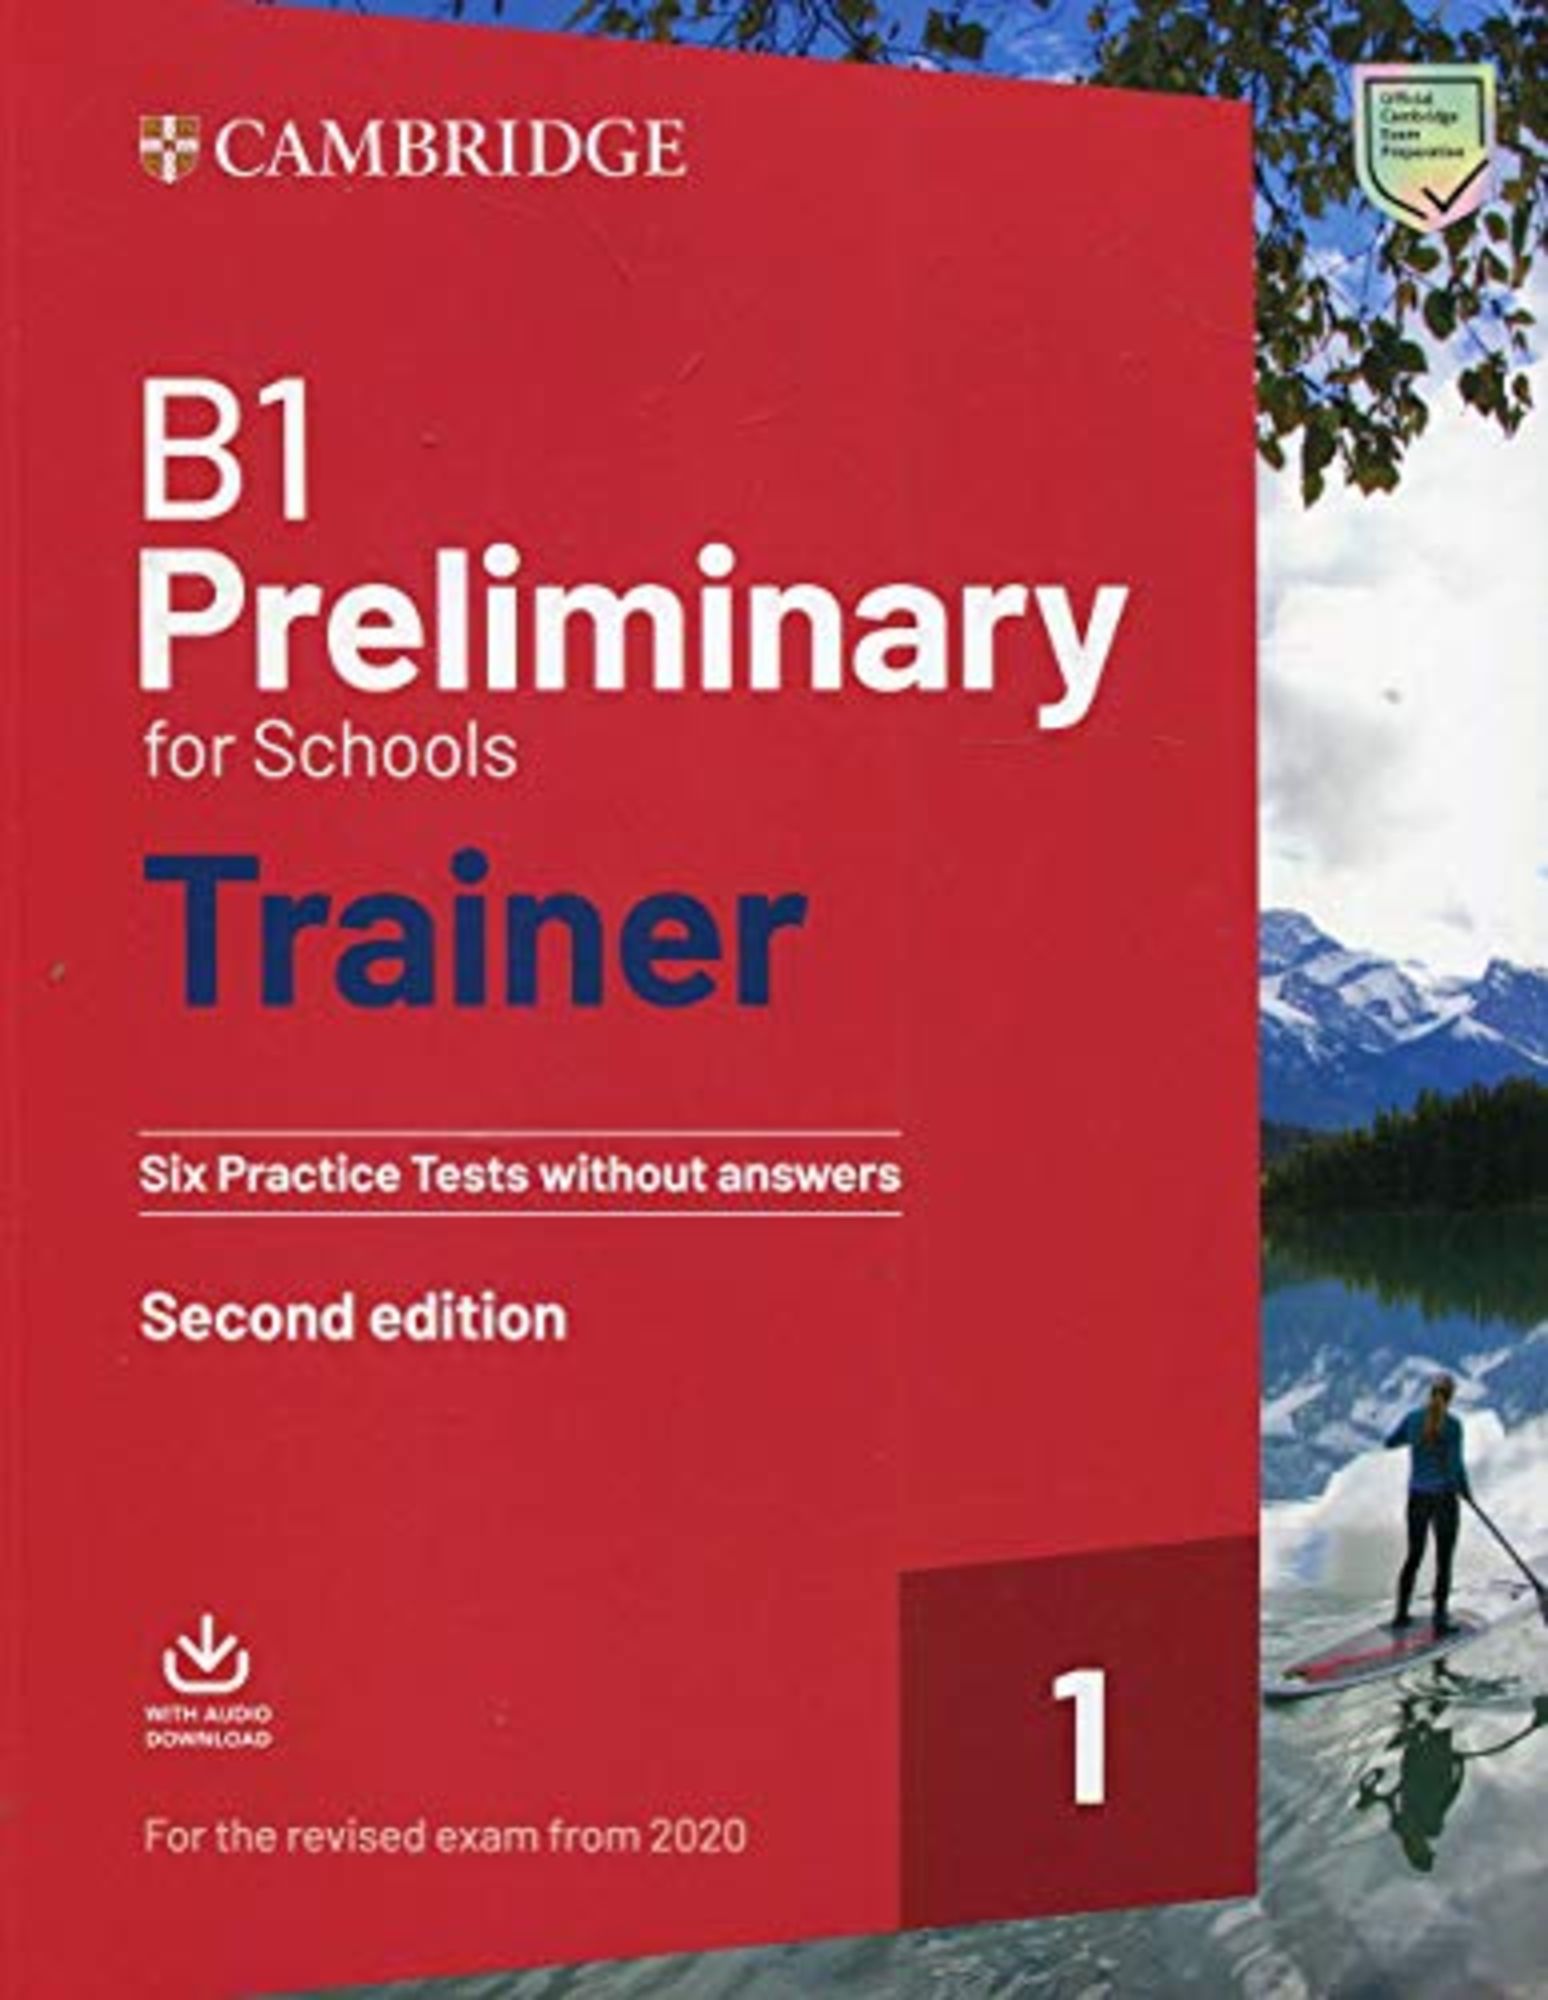 Without　with　Exam　Practice　the　Revised　Trainer　Six　Downloadable　Schulbuch　Tests　for　Preliminary　'Englisch'　'978-1-108-52887-0'　Answers　Audio'　Schools　for　B1　2020